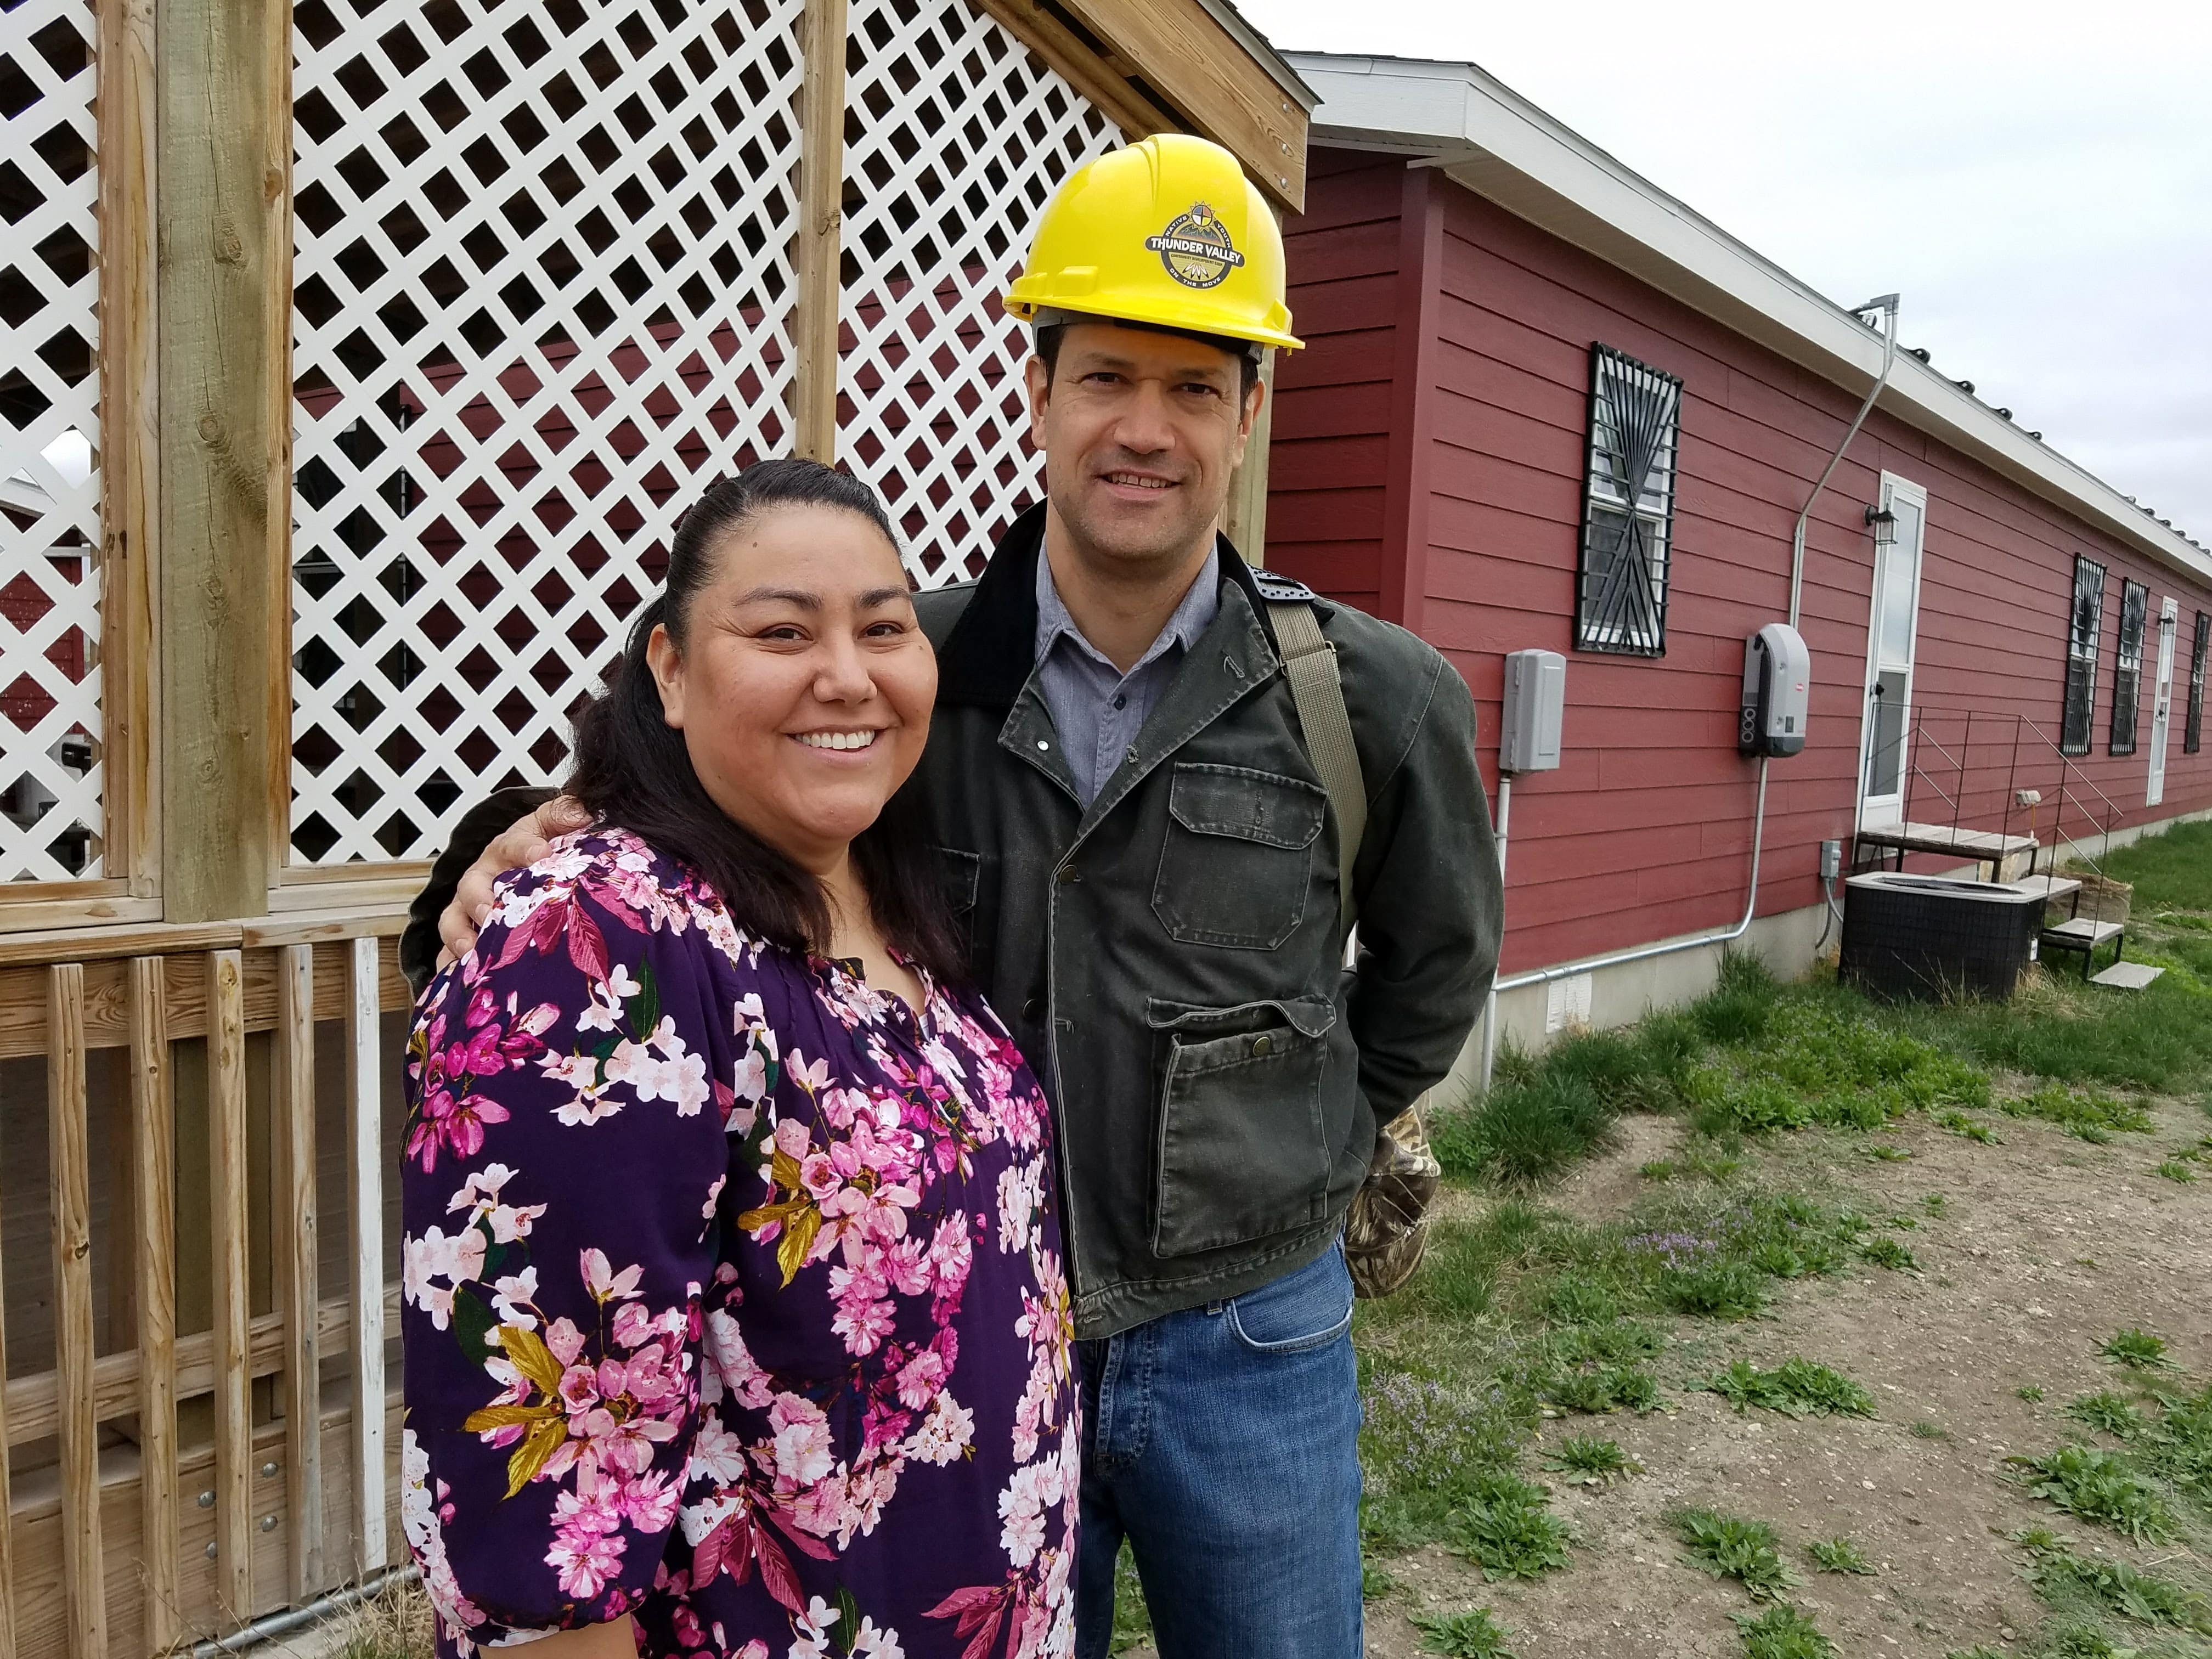 HAC CEO David Lipsetz tours housing projects on the Pine Ridge reservation